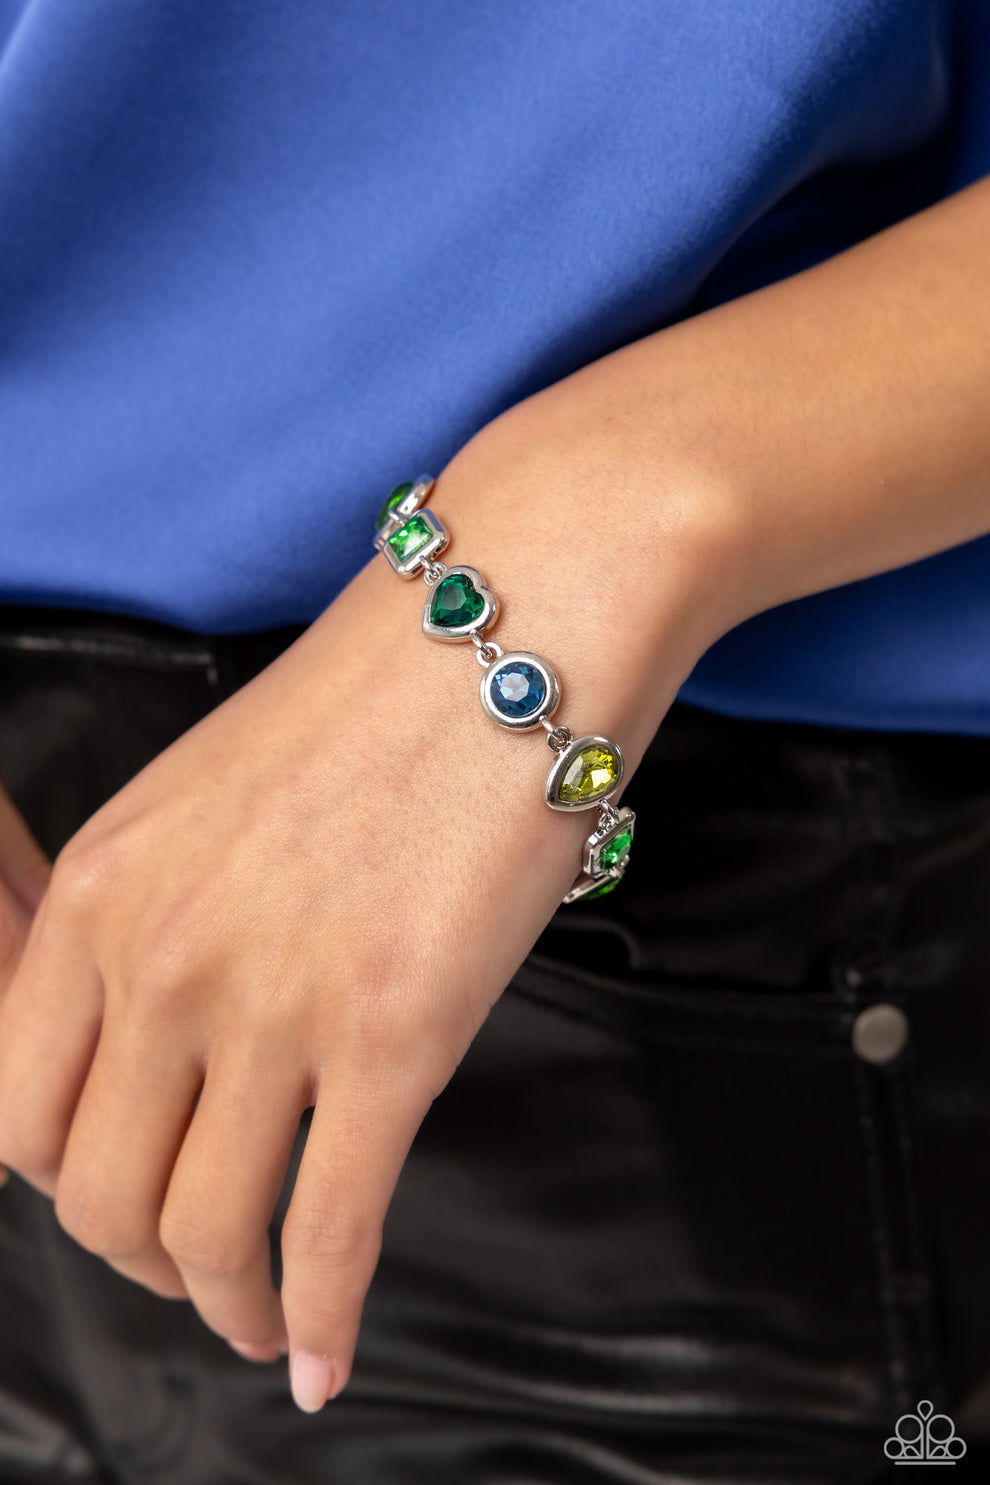 Actively Abstract - green bracelet